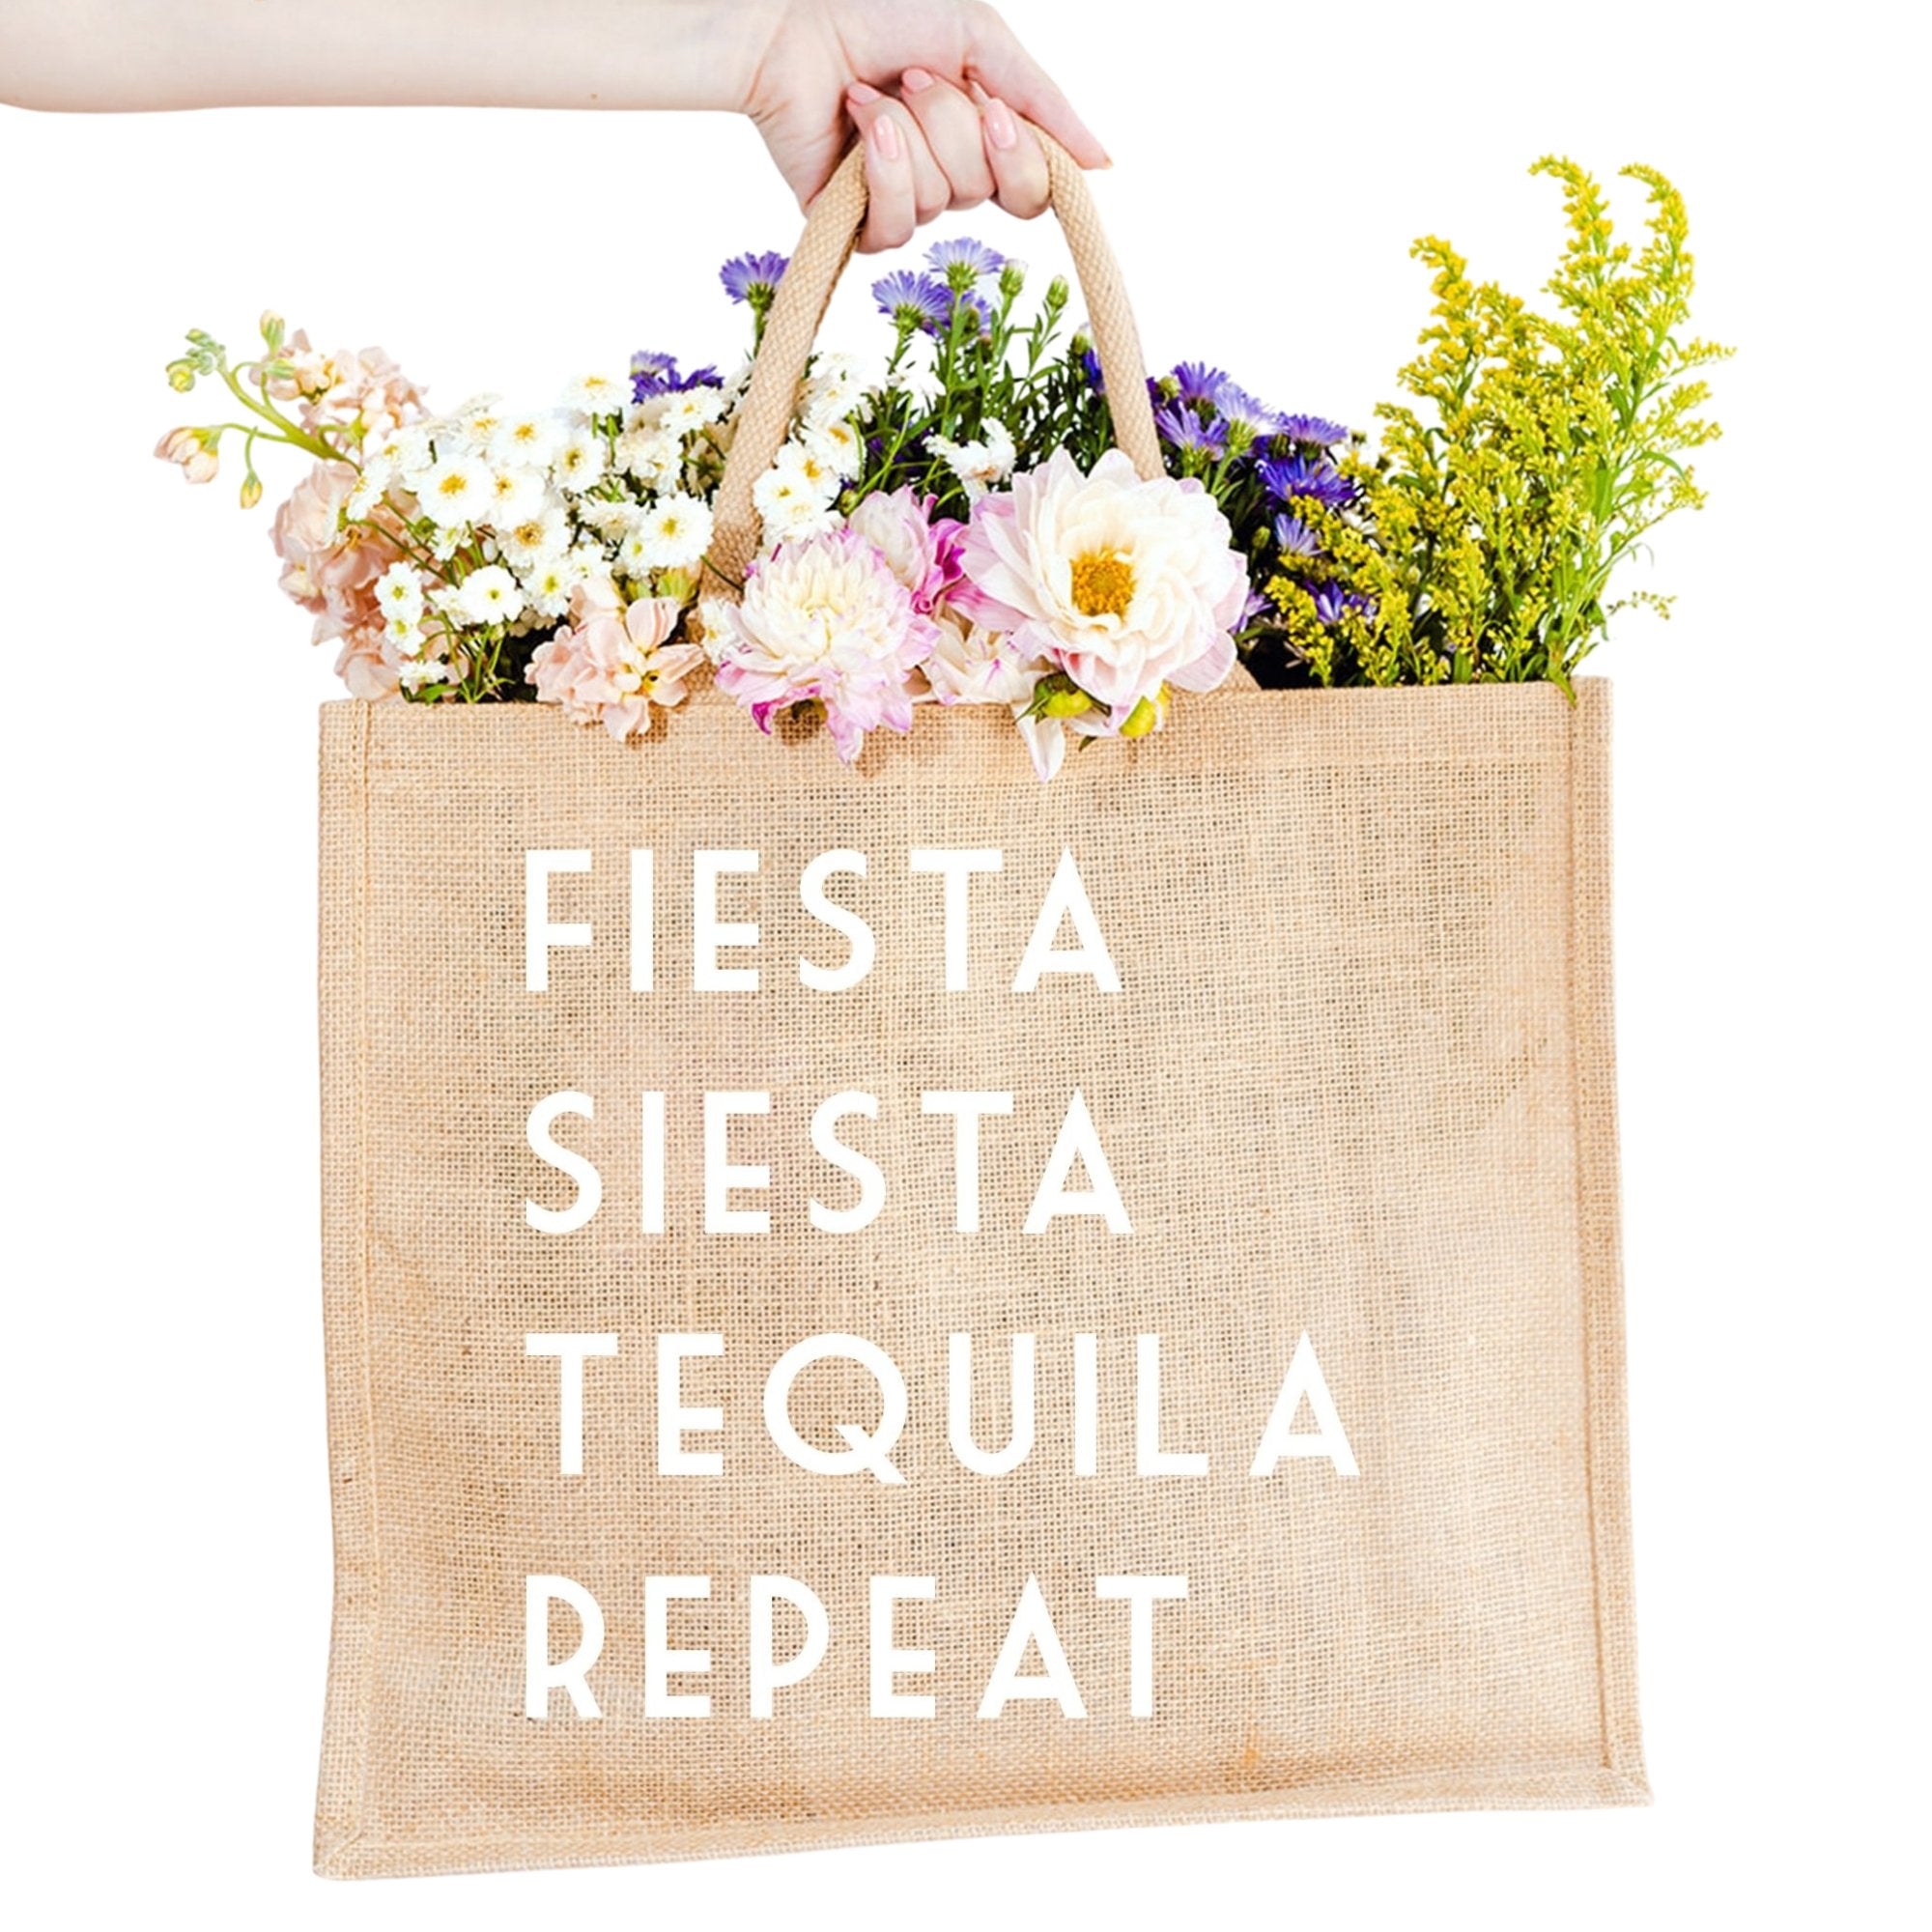 A custom jute bag reads "Fiesta, Siesta, Tequila, Repeat" on the front